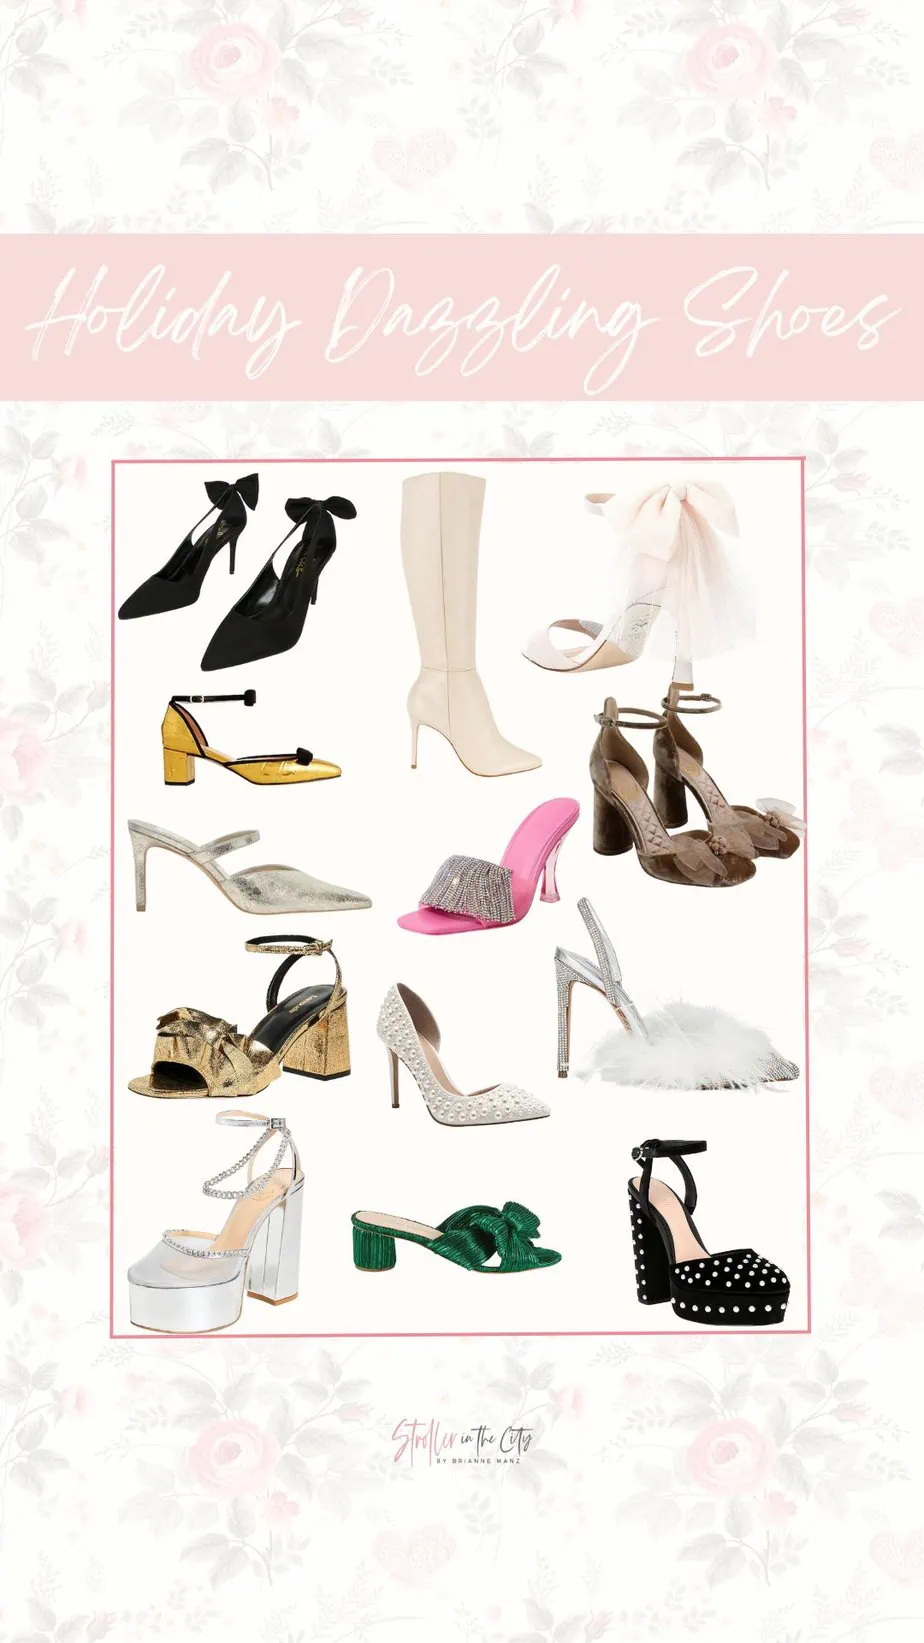 holiday dazzling shoes